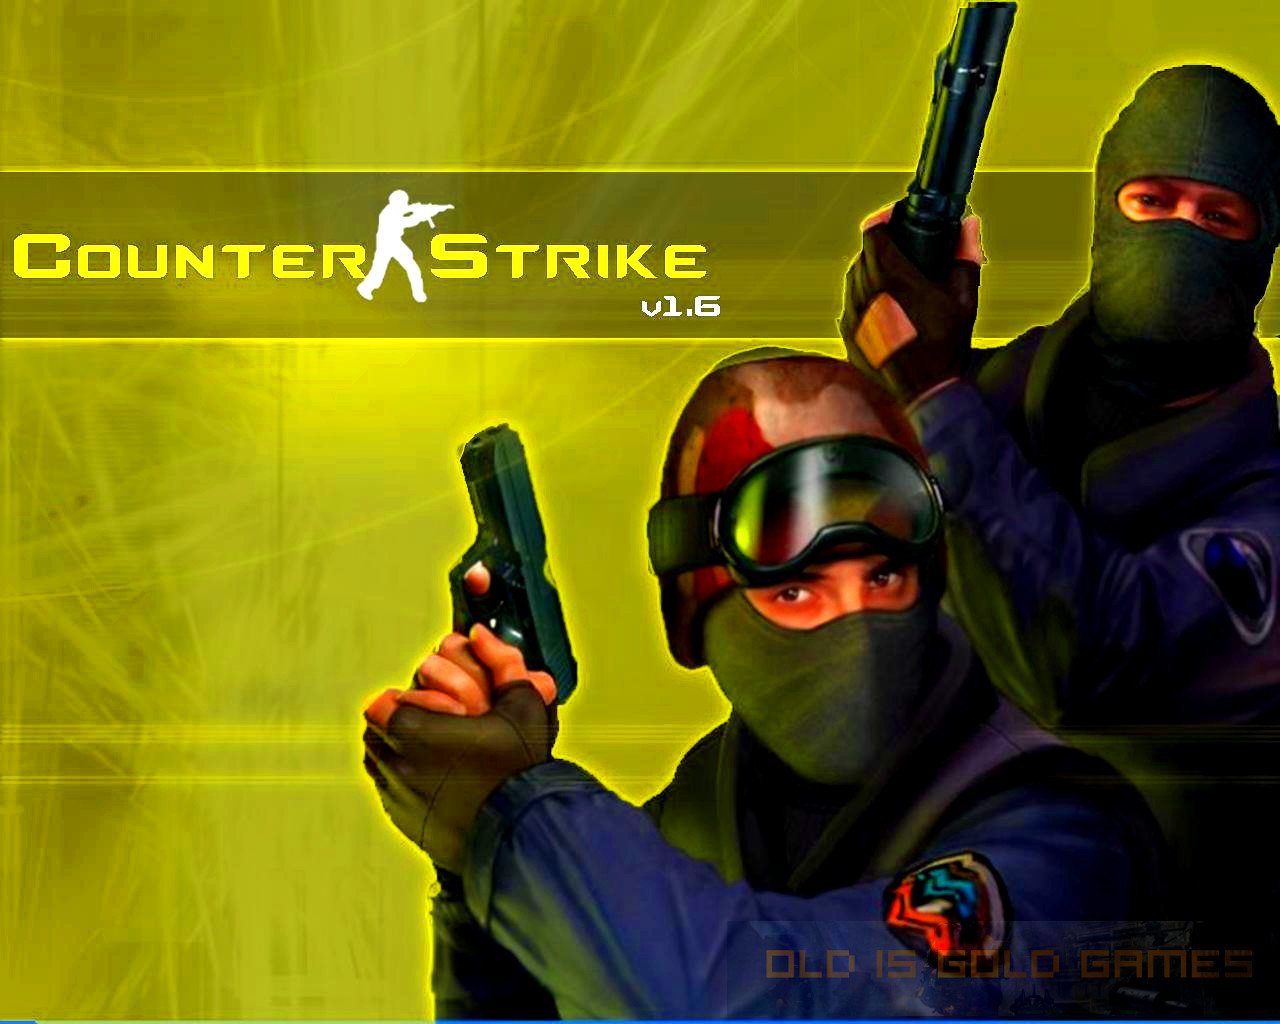 Free Download Counter Strike 16 Download [1280x1024] For Your Desktop, Mobile & Tablet. Explore Counter Strike 1.6 Wallpaper. Counter Strike 1.6 Wallpaper, Counter Strike Wallpaper, Counter Strike Wallpaper